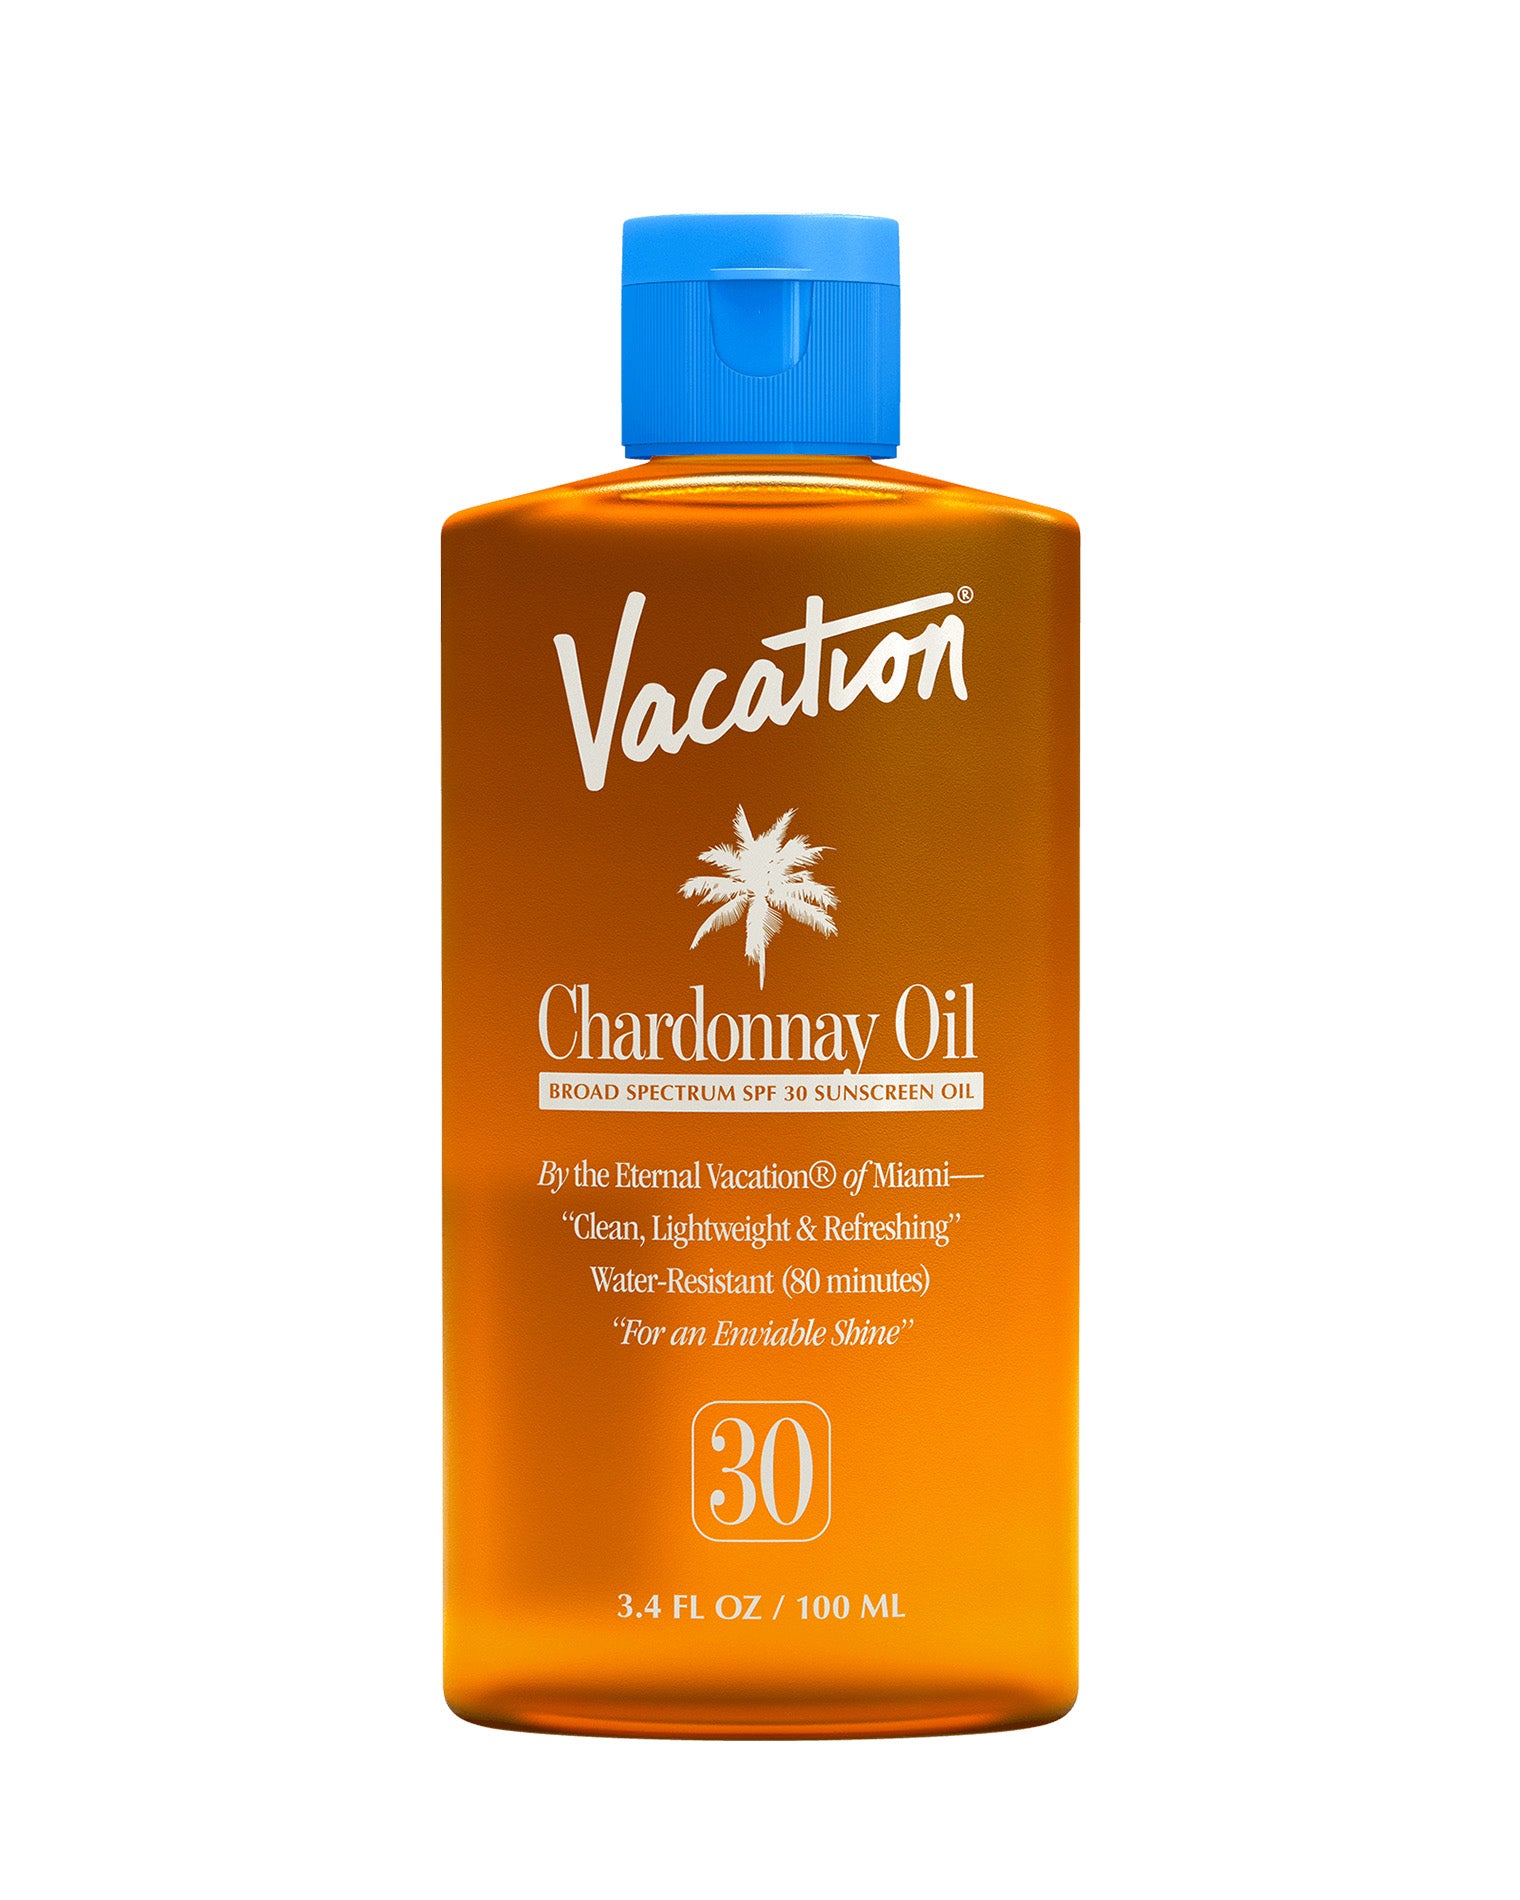 Vacation Chardonnay Oil SPF 30 NCOL | Hover